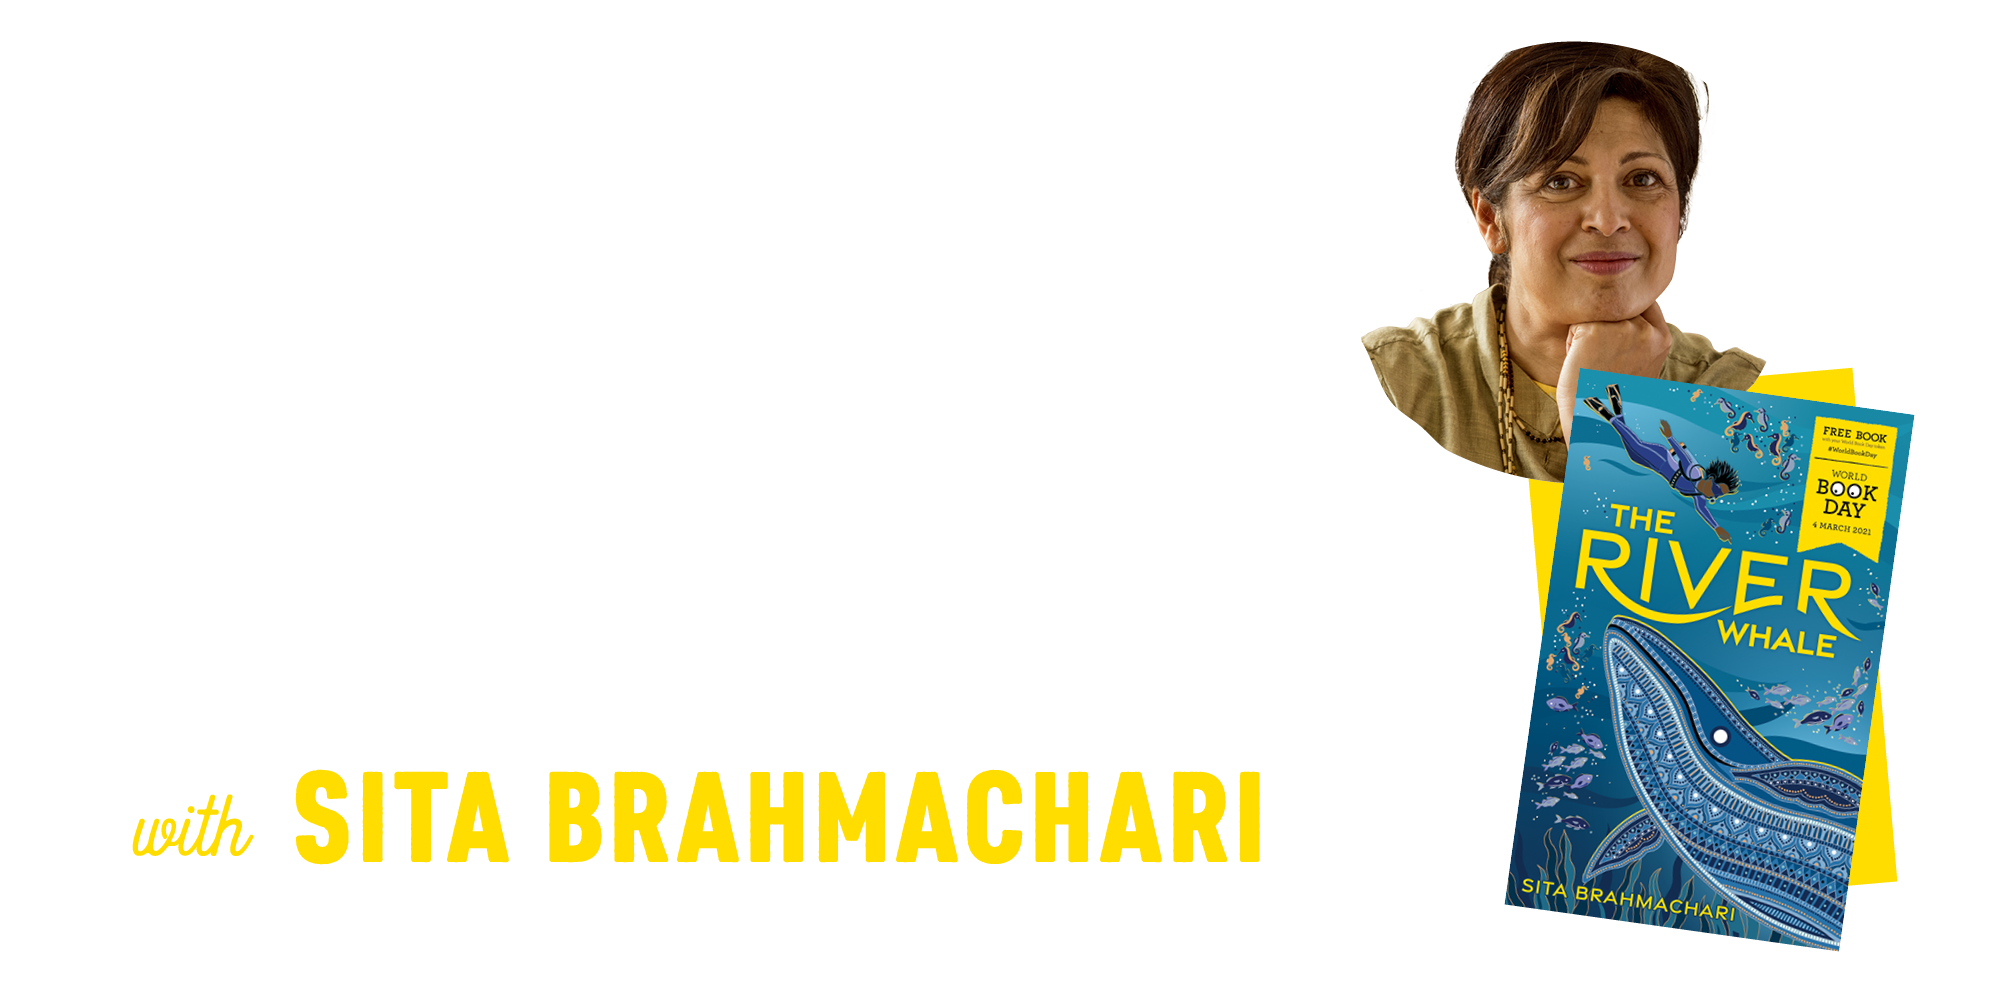 Author & Illustrator Academy: Inspirations for storytelling flow